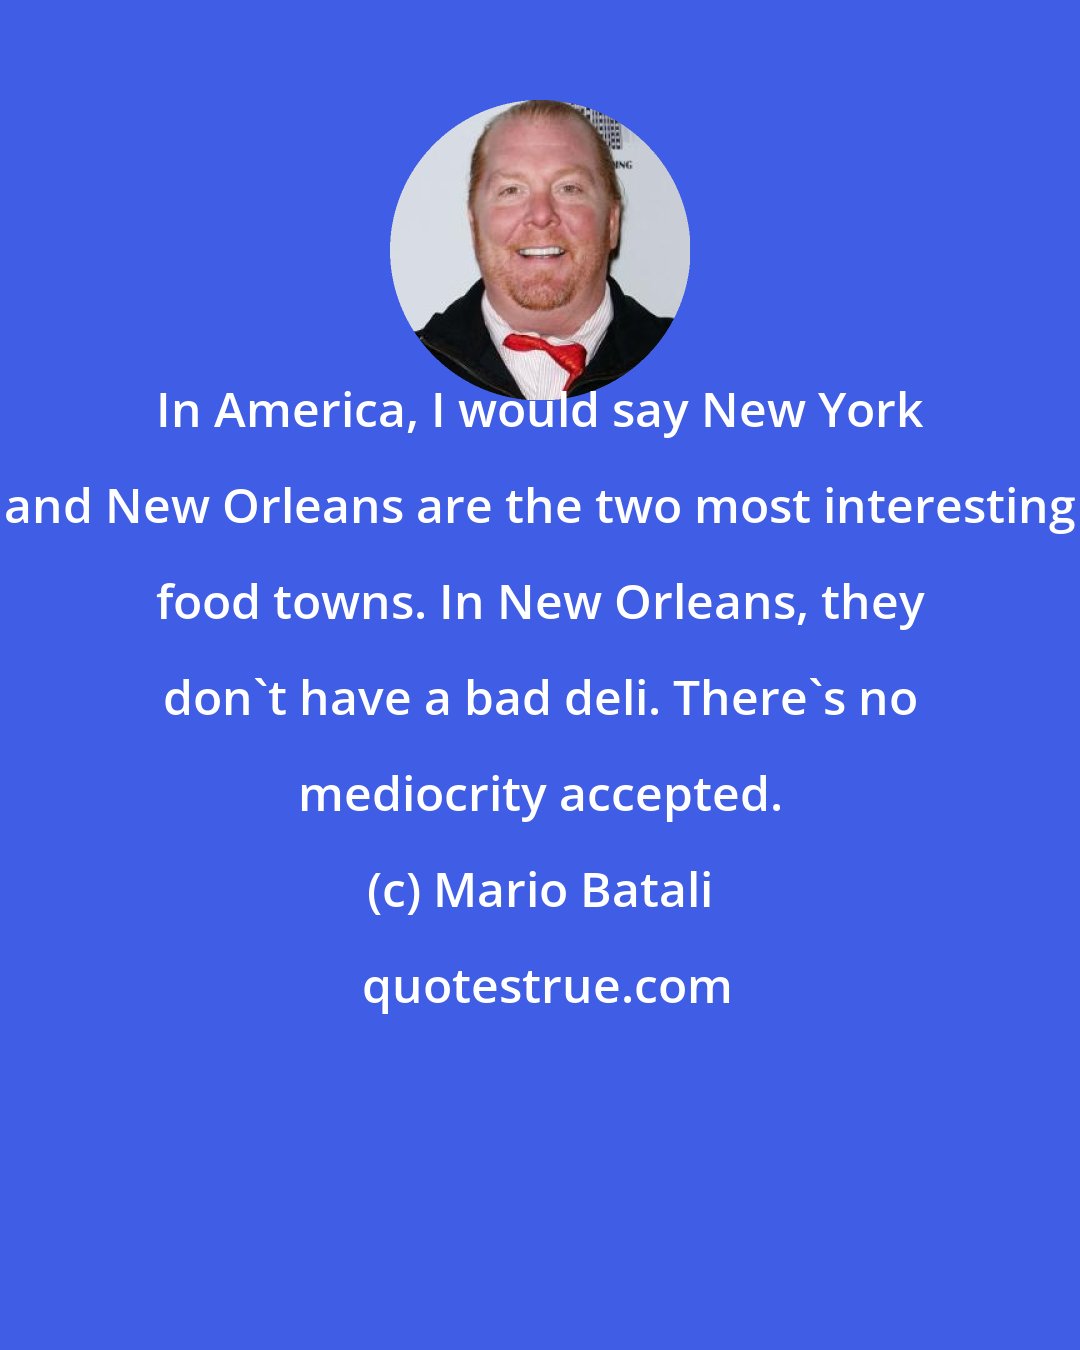 Mario Batali: In America, I would say New York and New Orleans are the two most interesting food towns. In New Orleans, they don't have a bad deli. There's no mediocrity accepted.